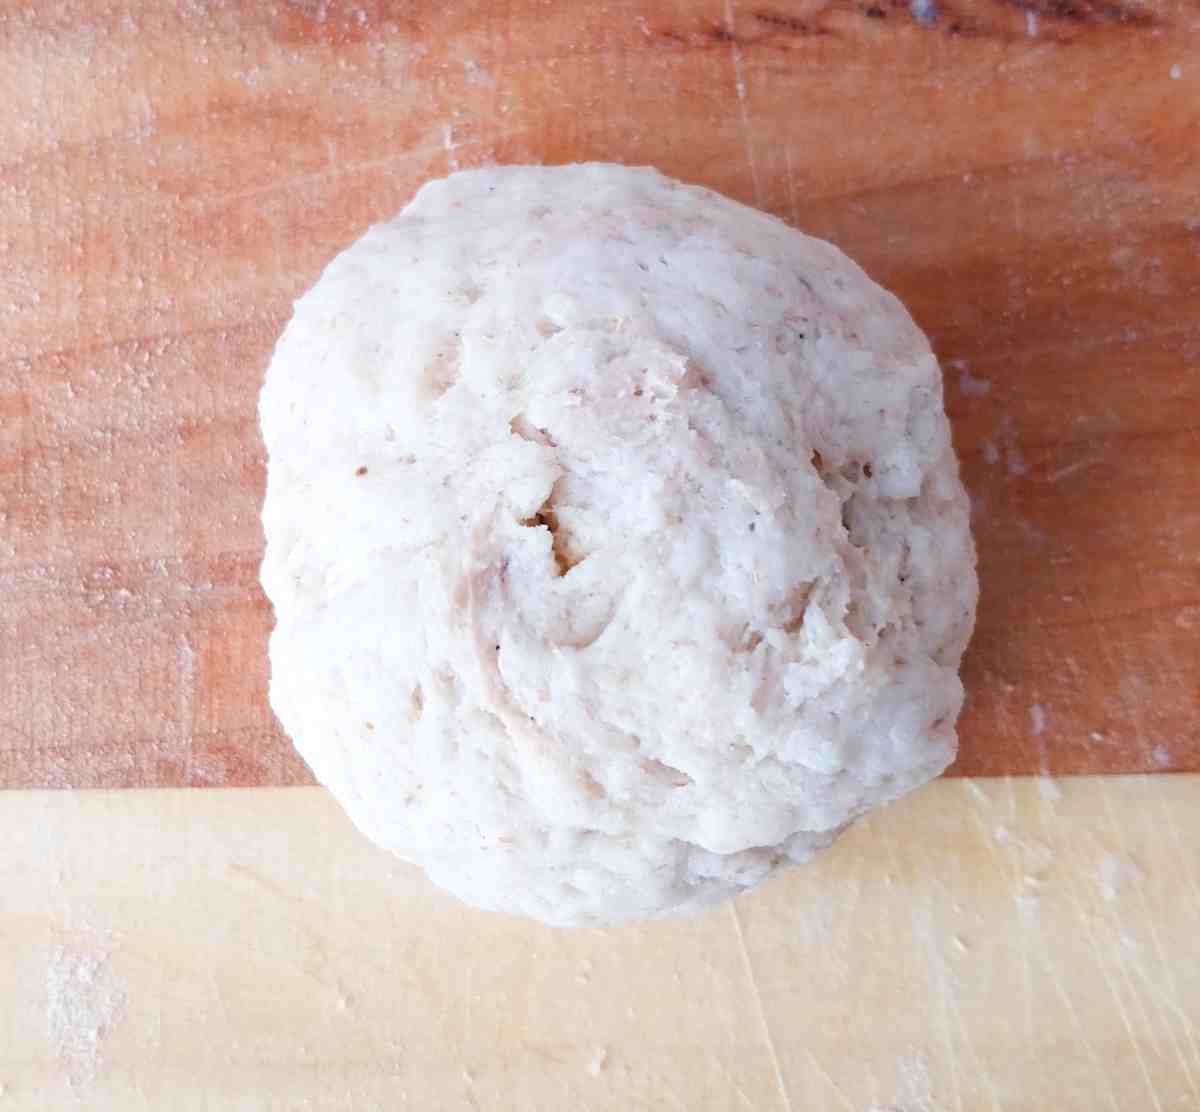 The dough ball on a wooden surface.